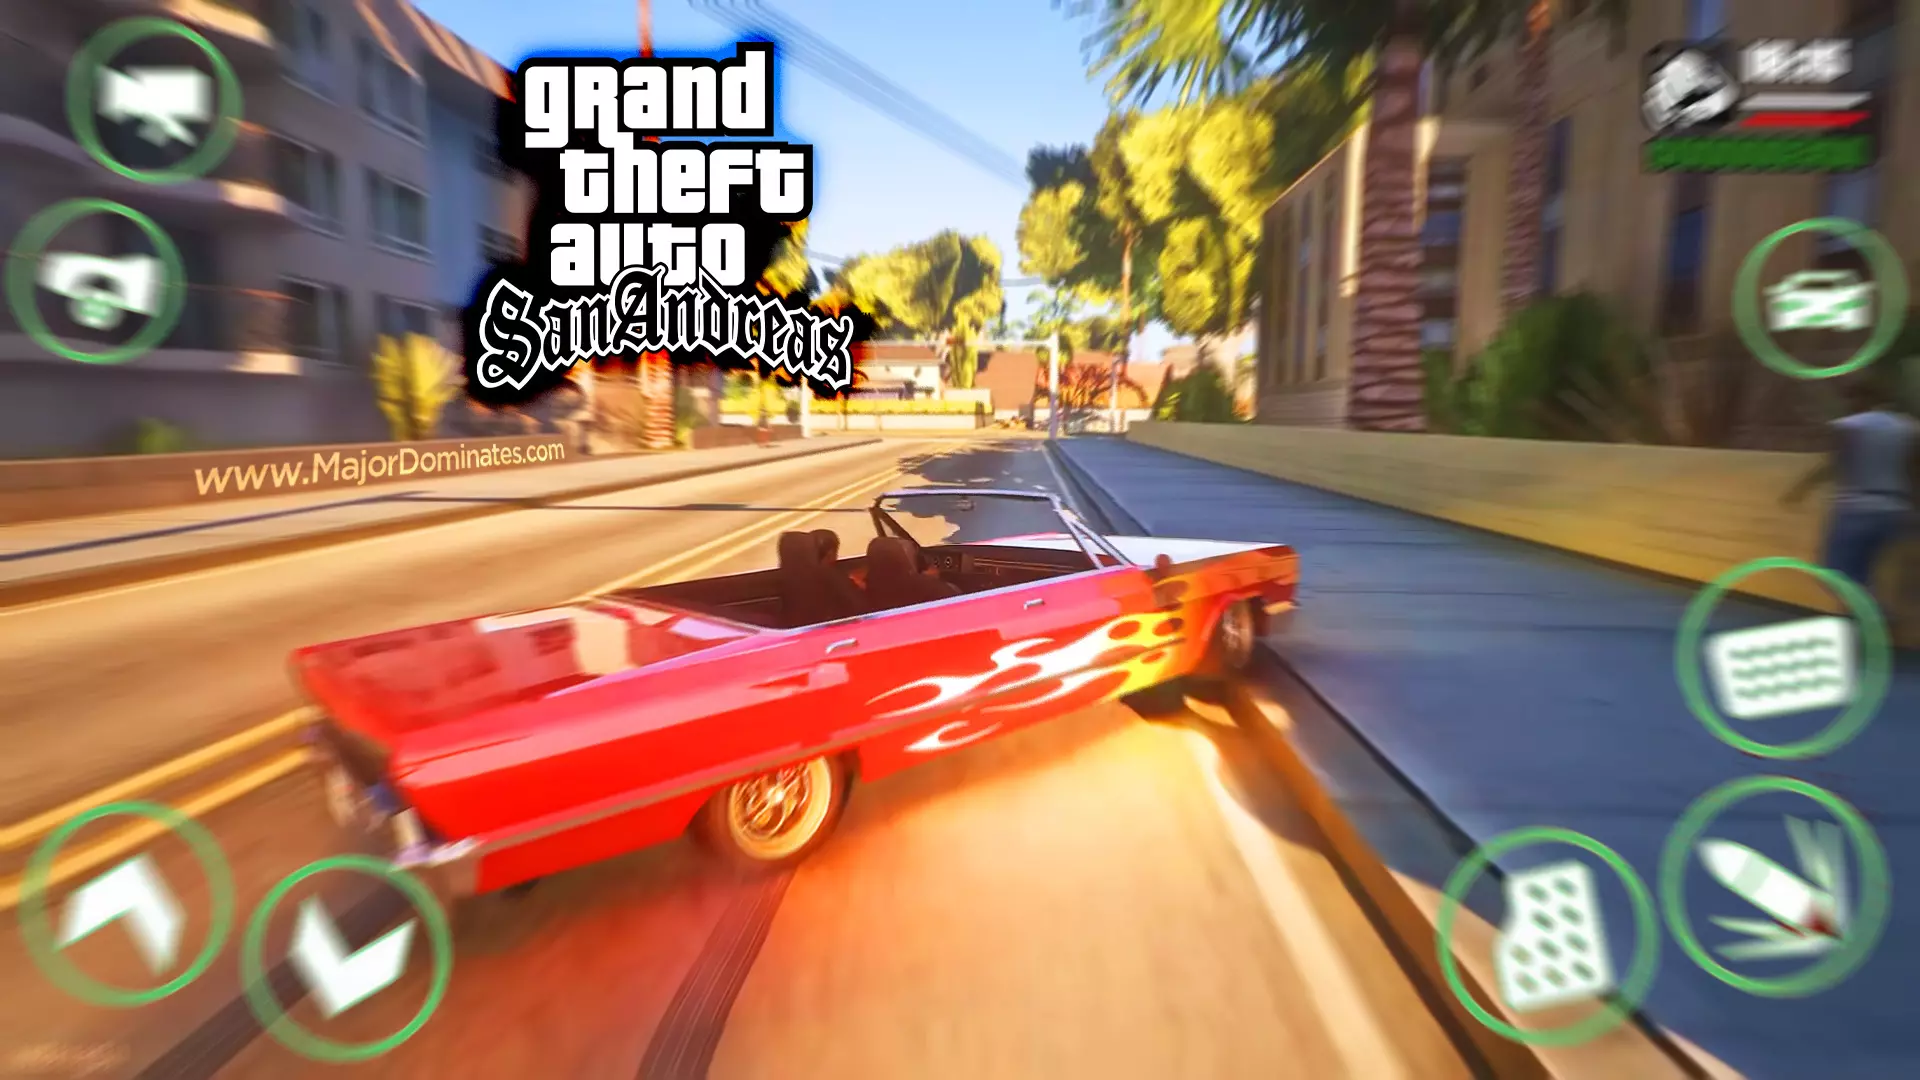 GTA San Andreas APK + OBB download links for Android: Real mobile game or  fake?